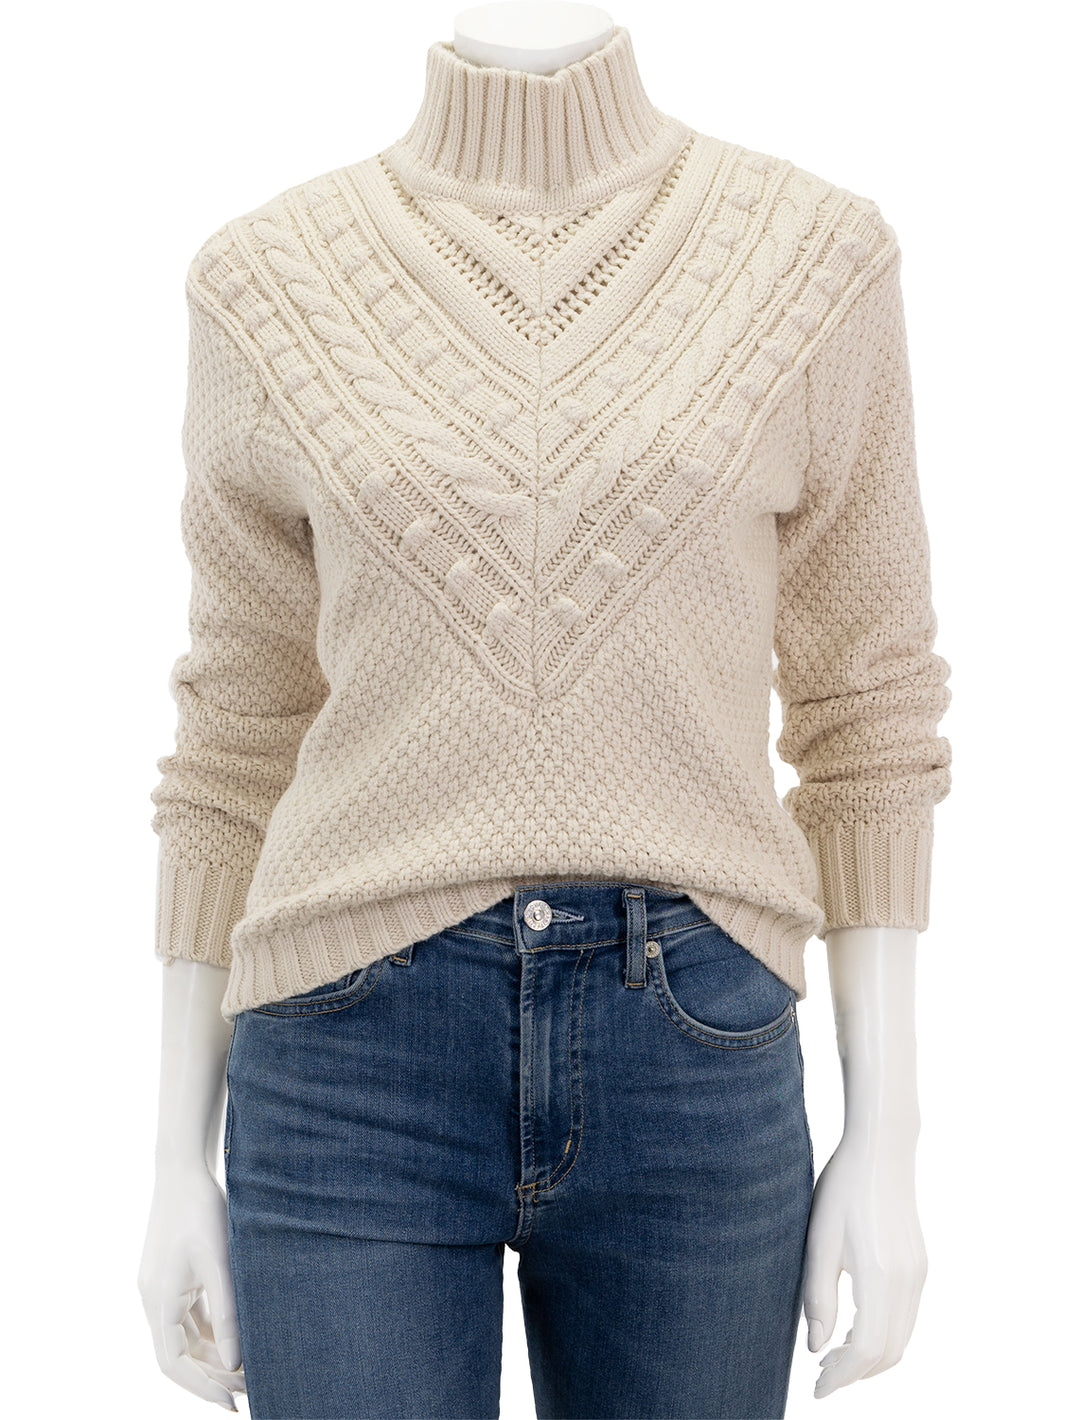 Front view of Splendid's maggie turtleneck sweater in white sand.